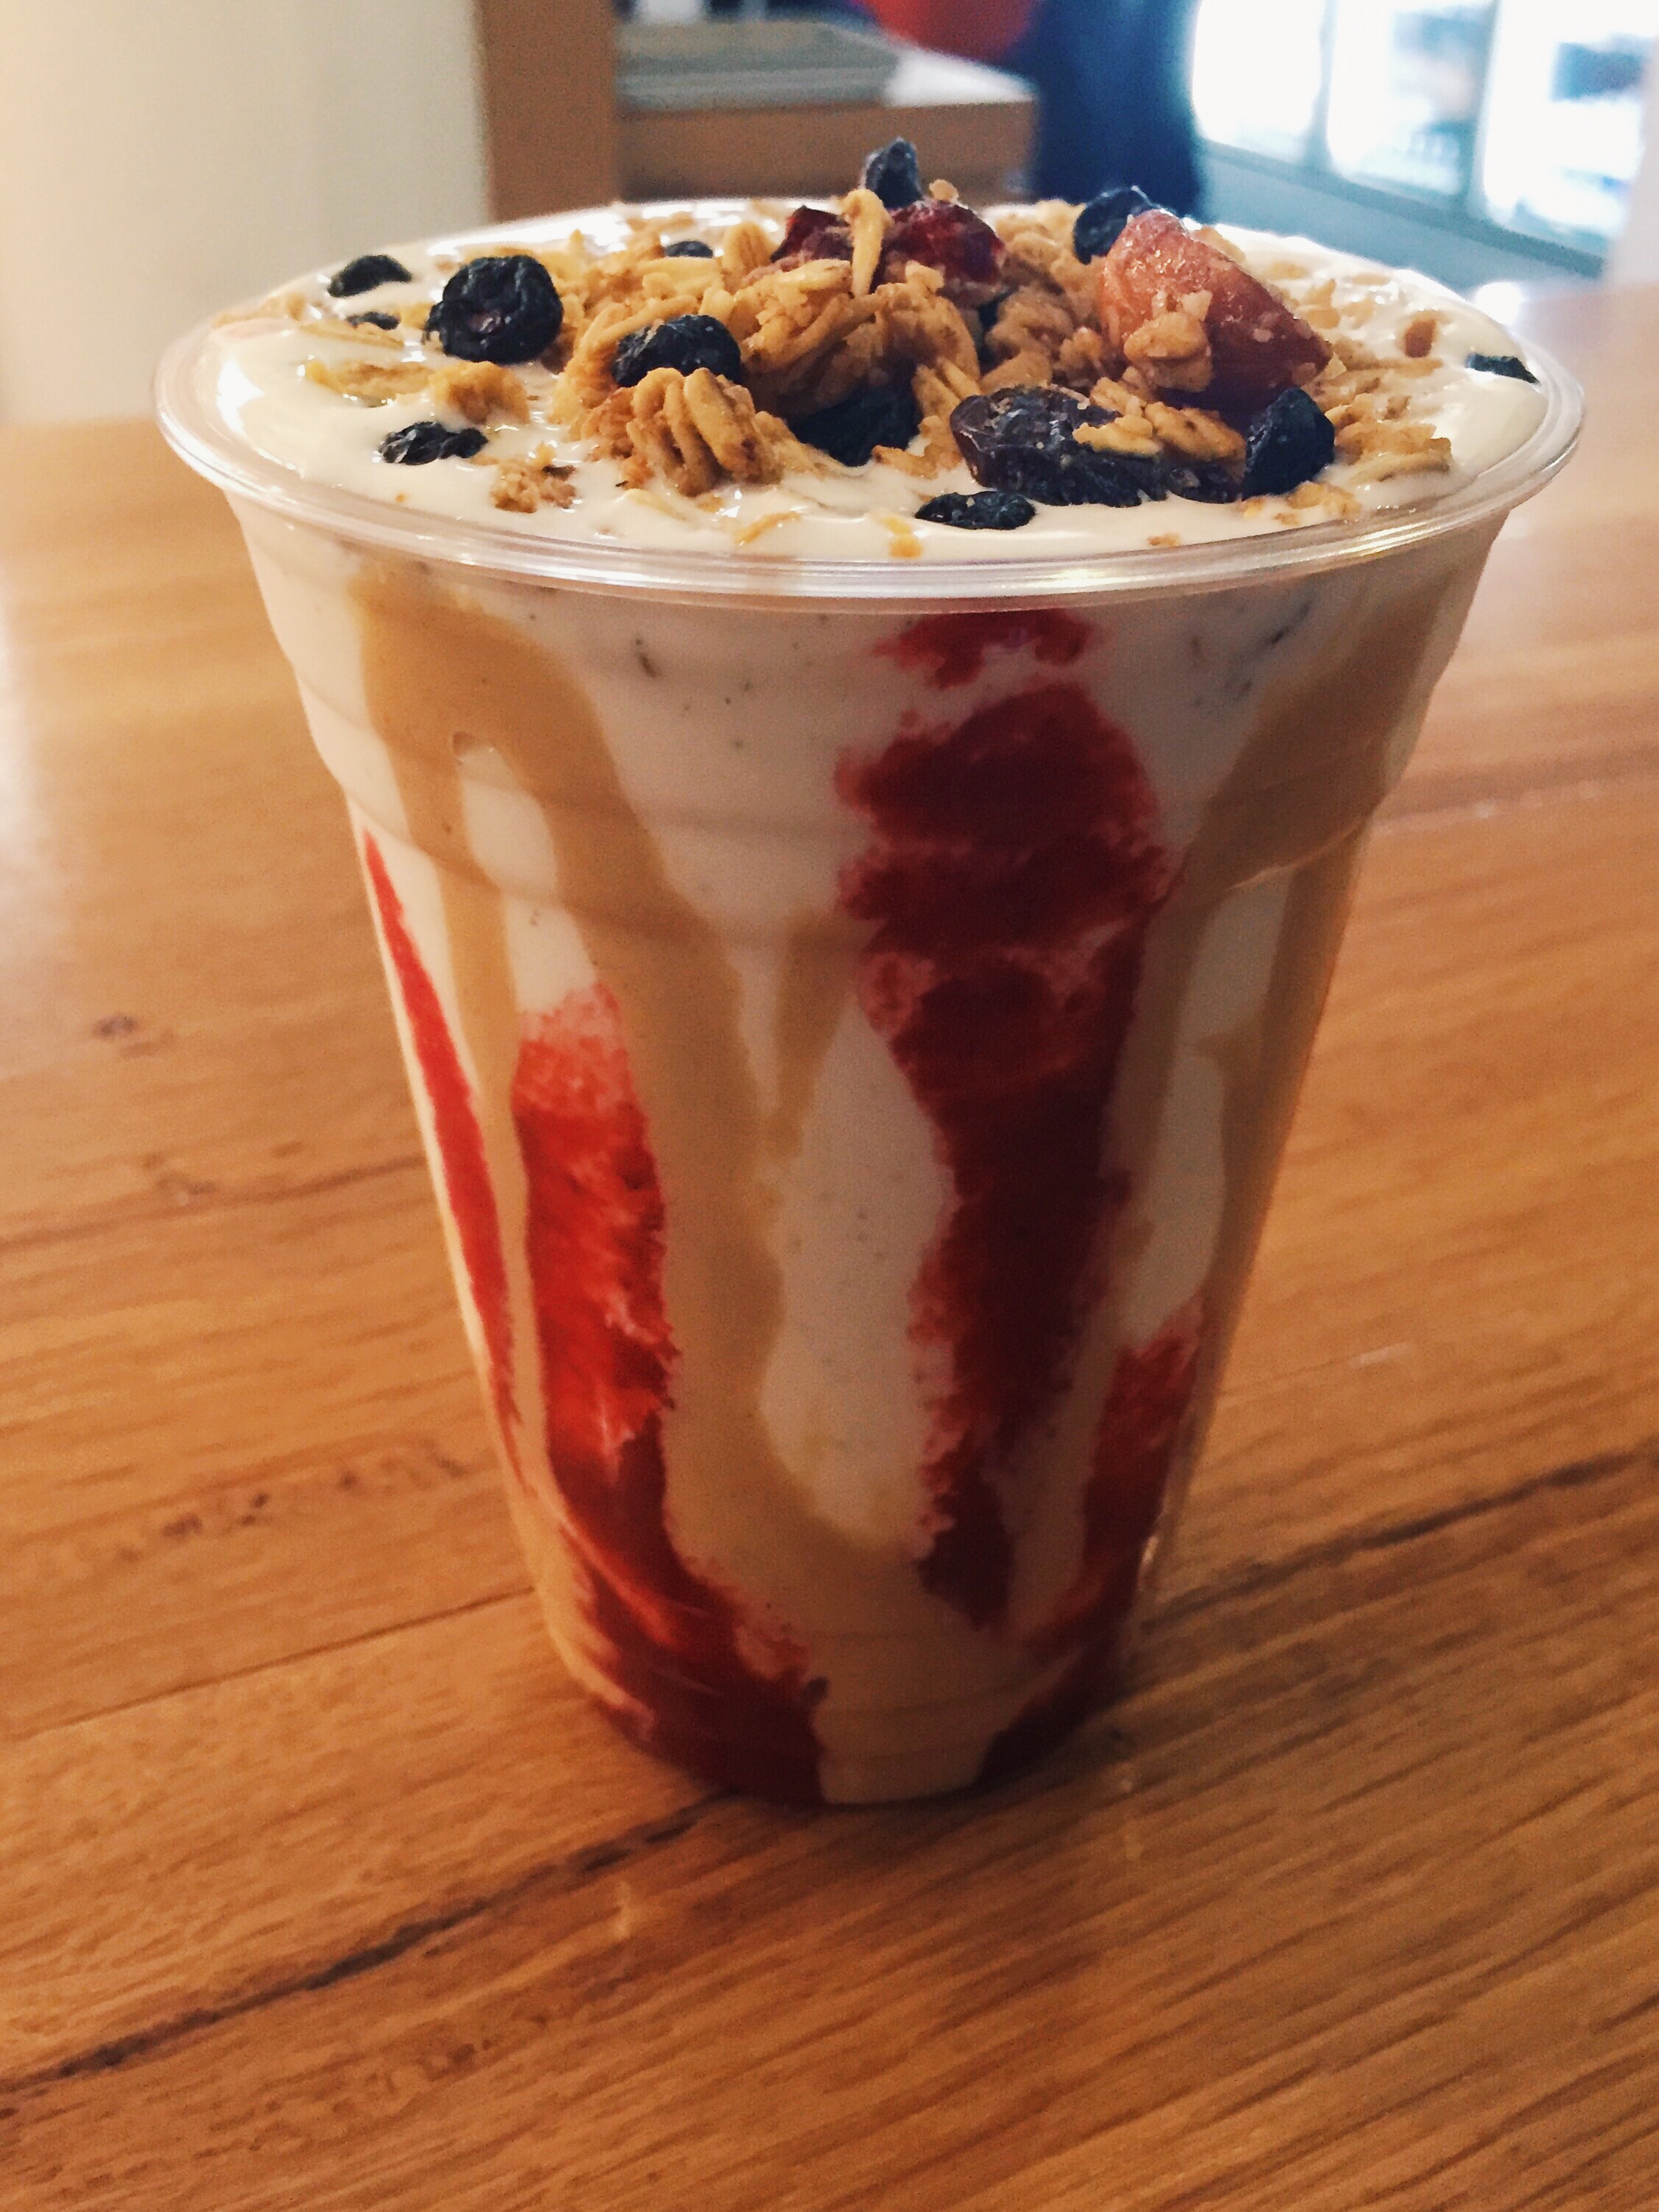 The breakfast creations of Creamline — like this peanut butter and jelly yogurt shake — in the Chelsea Market, are mouthwatering. 